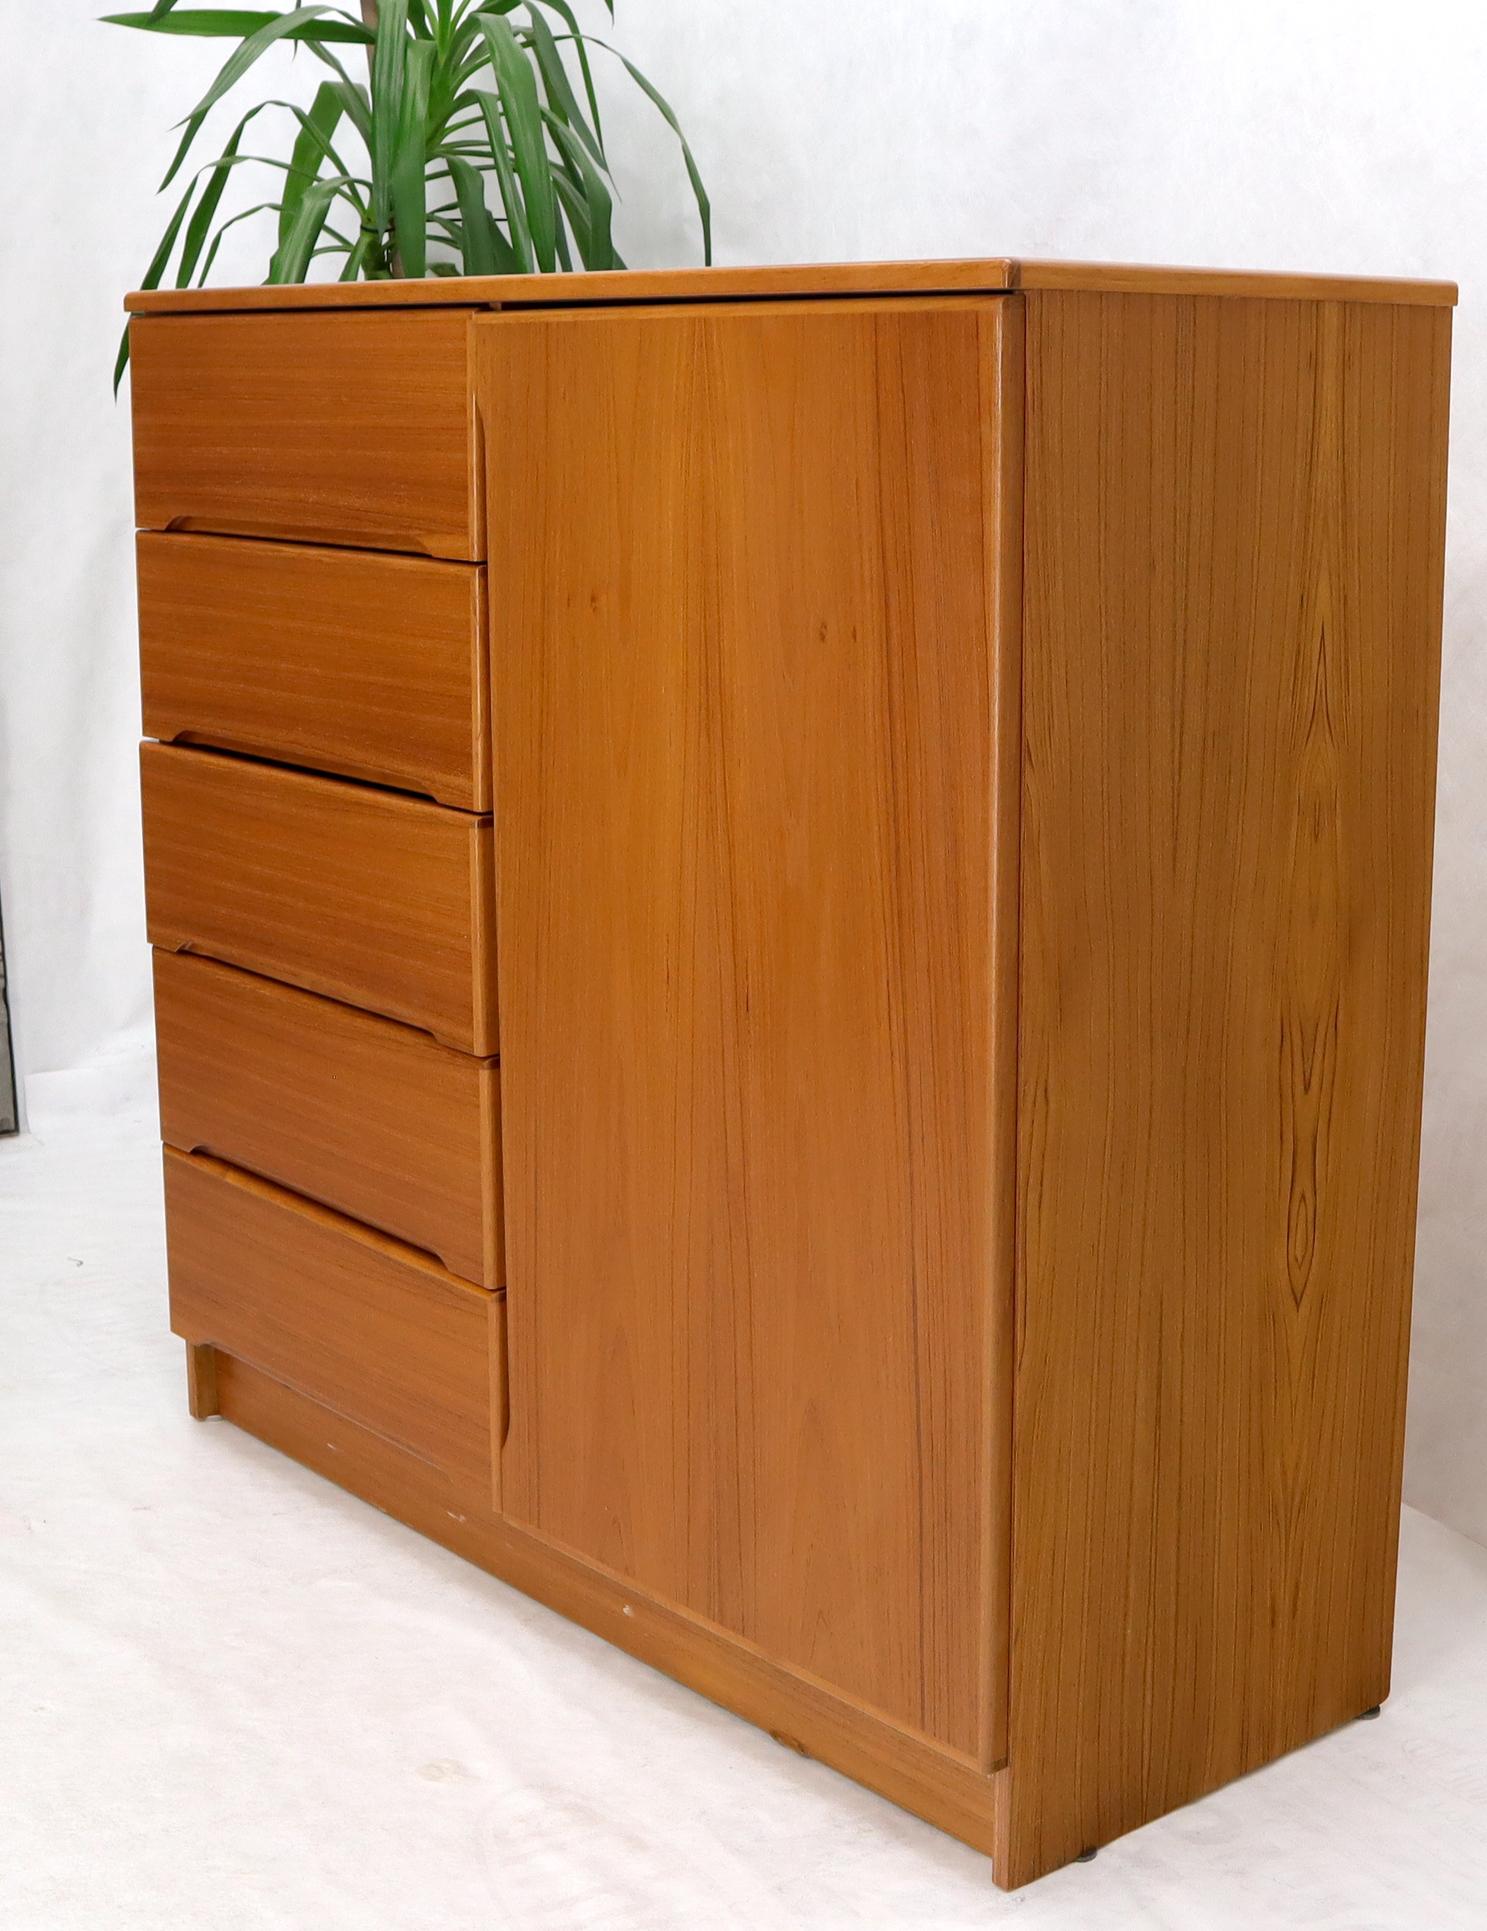 Mid-Century Modern teak 5 drawers cabinet dresser with a one door adjustable shelves compartment.